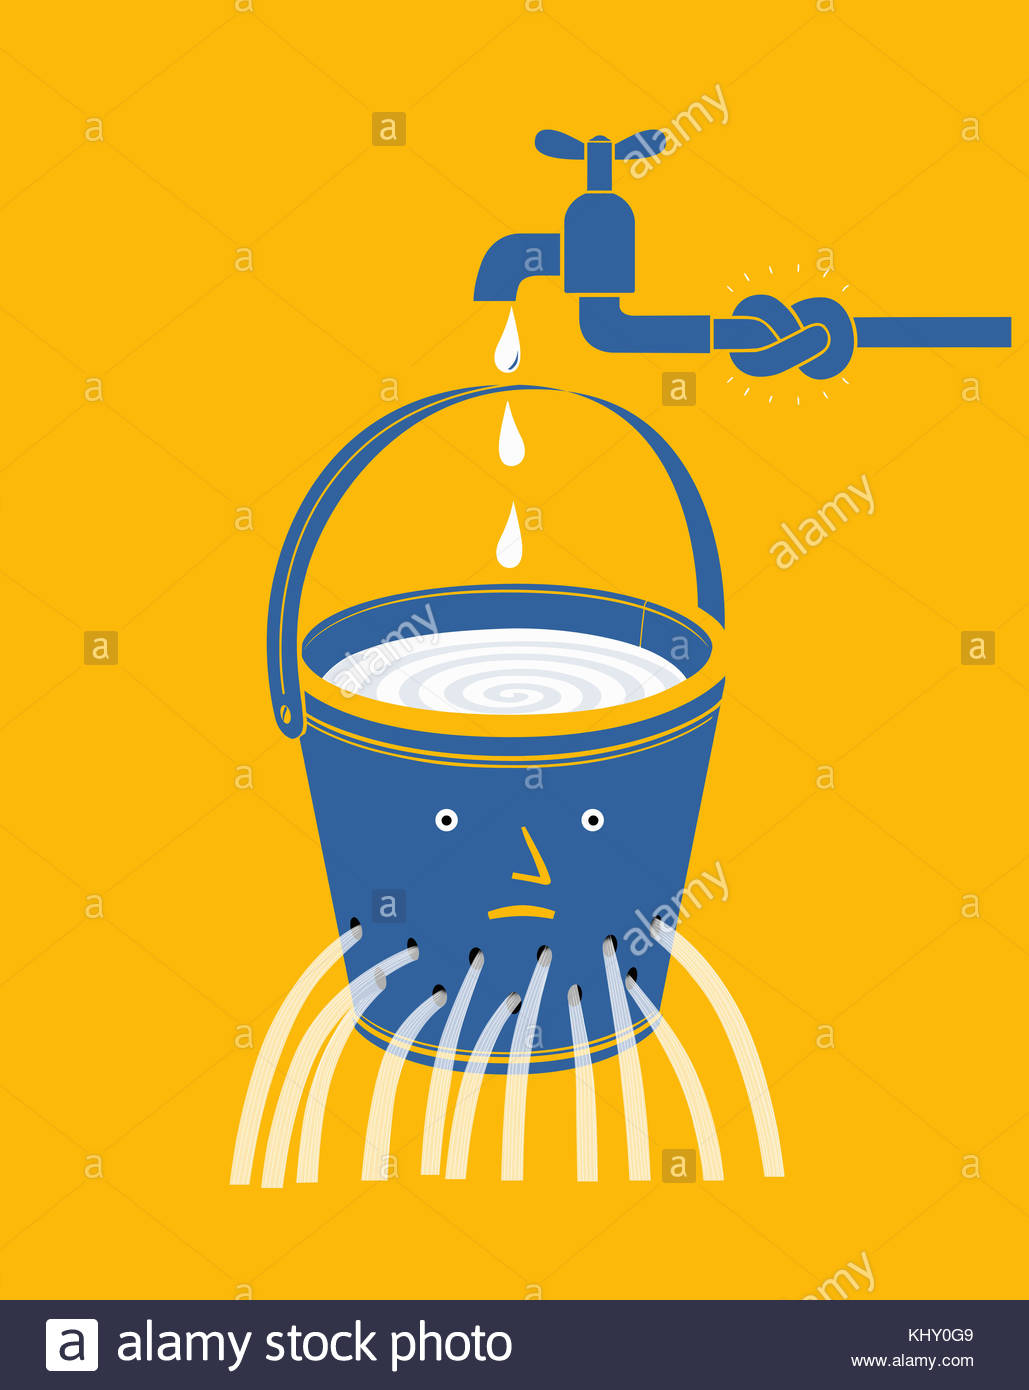 Leaking Taps Stock Photos & Leaking Taps Stock Images - Alamy